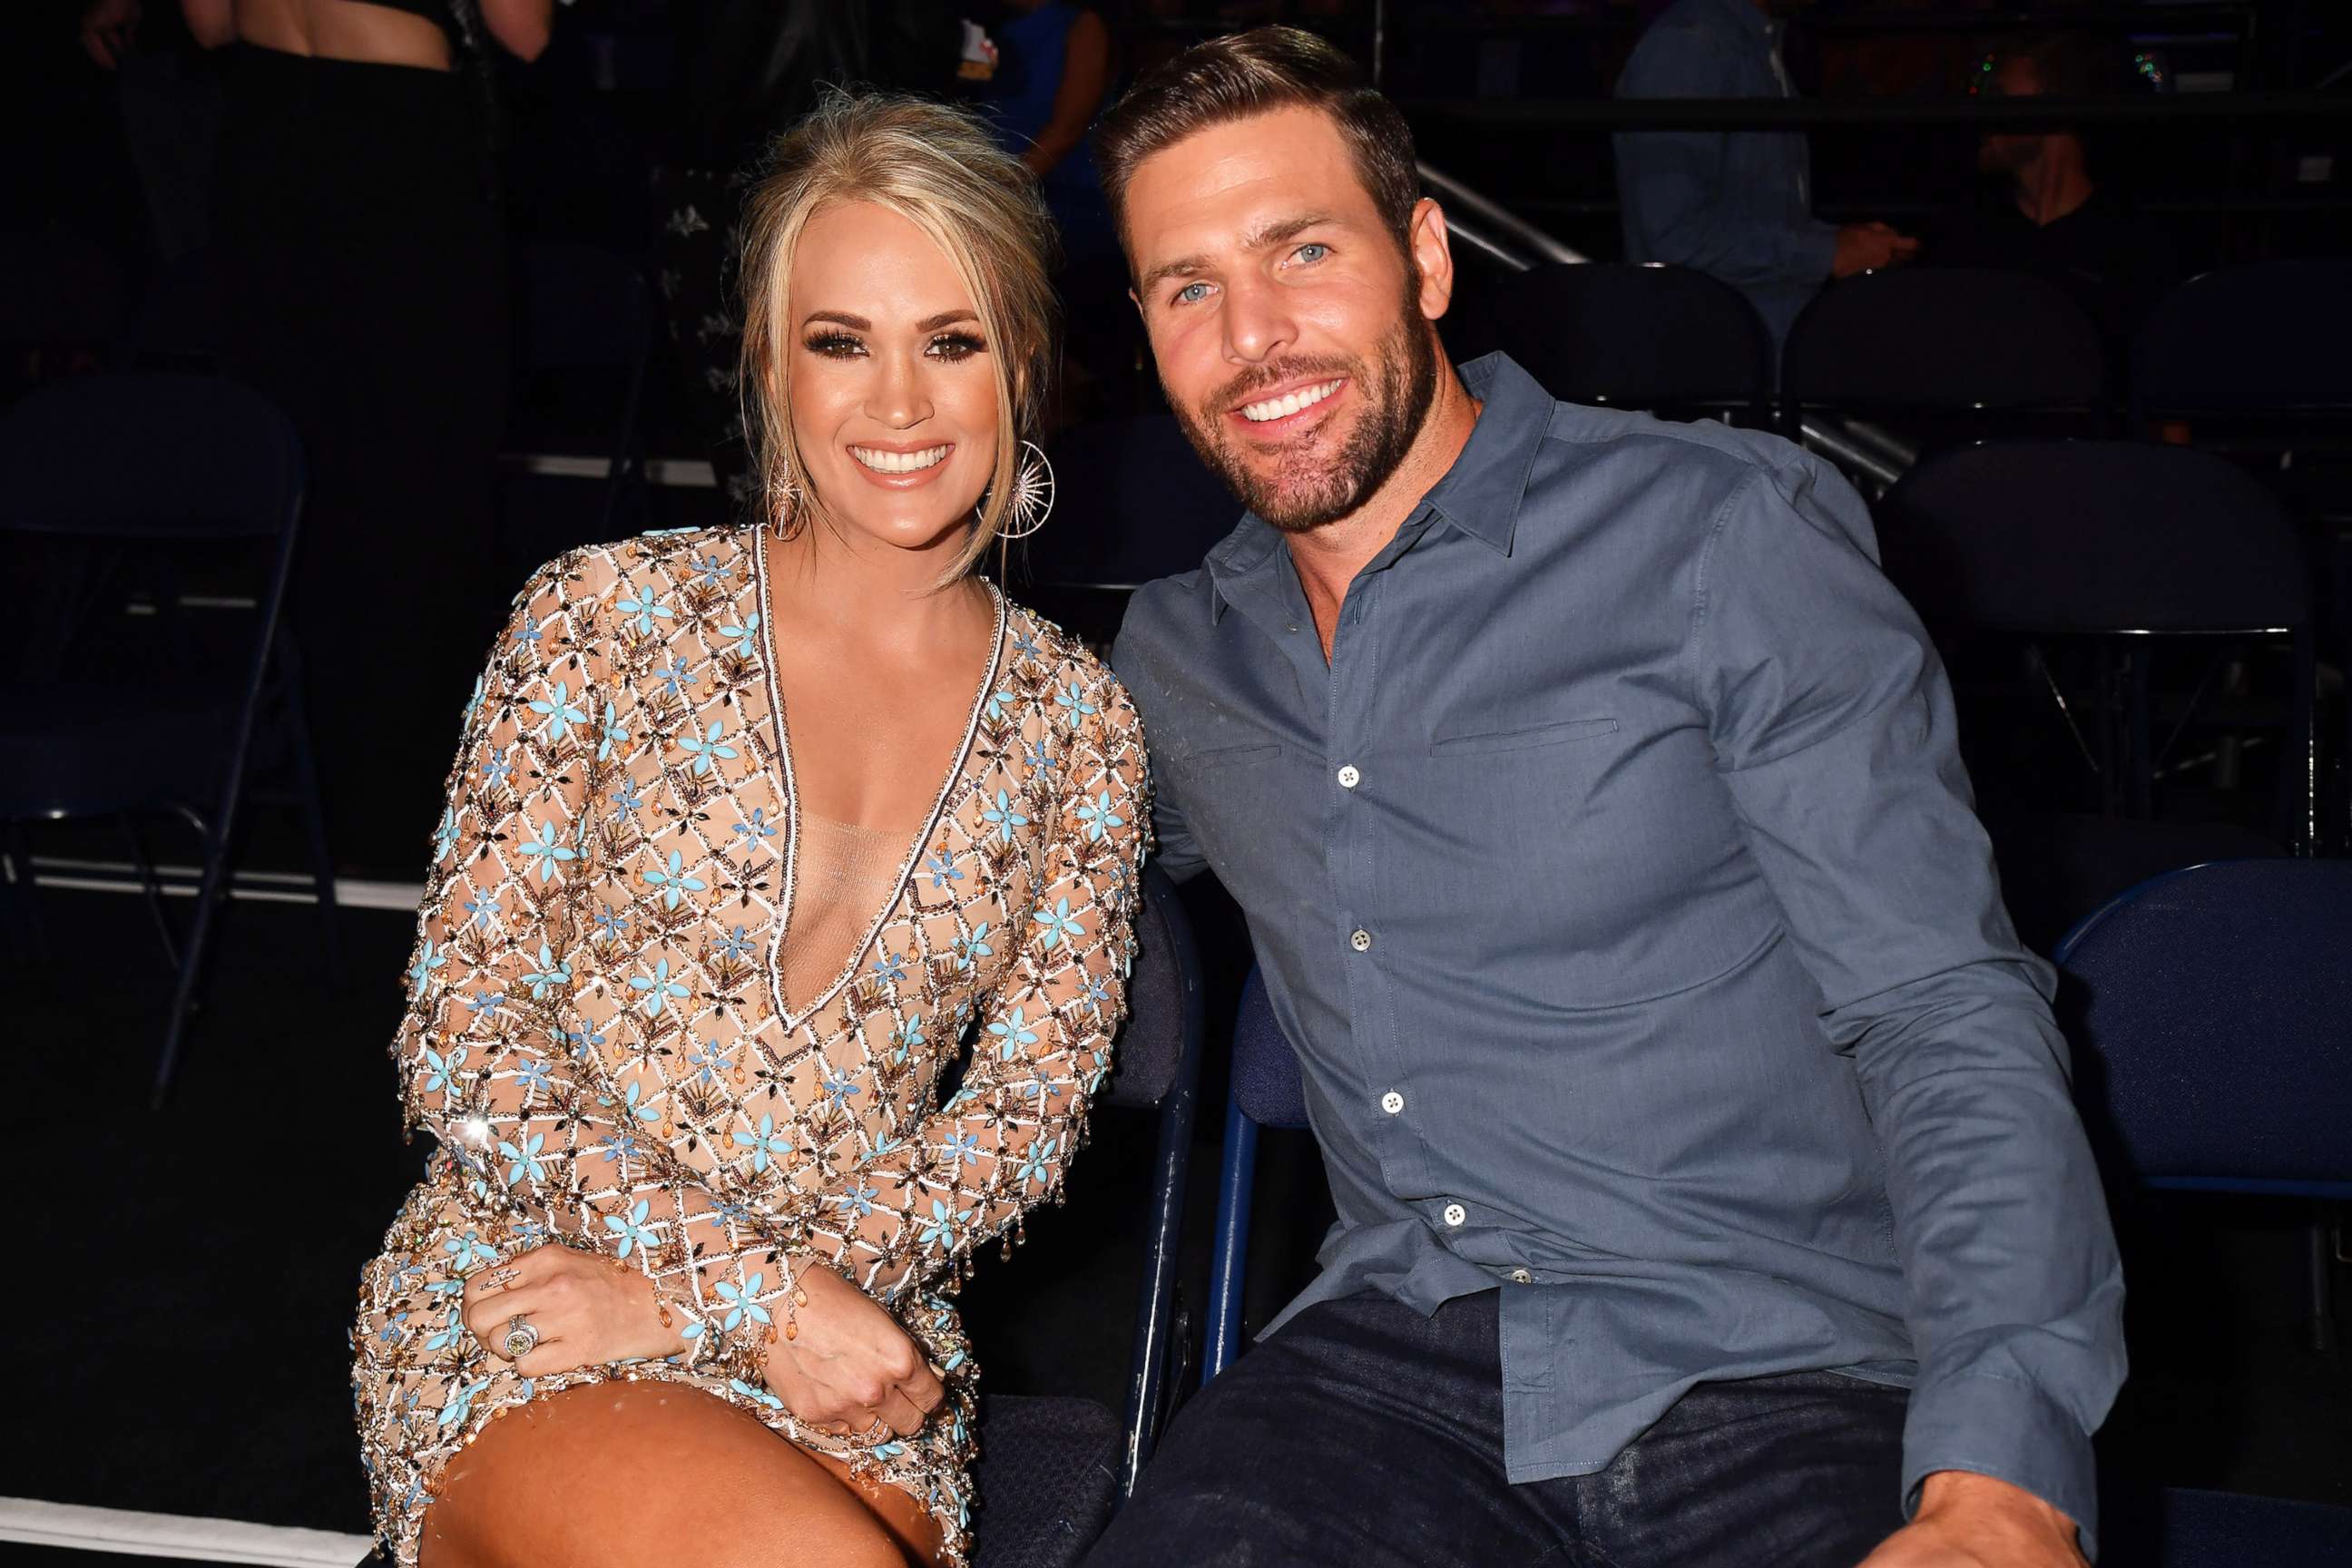 Carrie Underwood Reflects on Love in 'Take Me Out': Stream